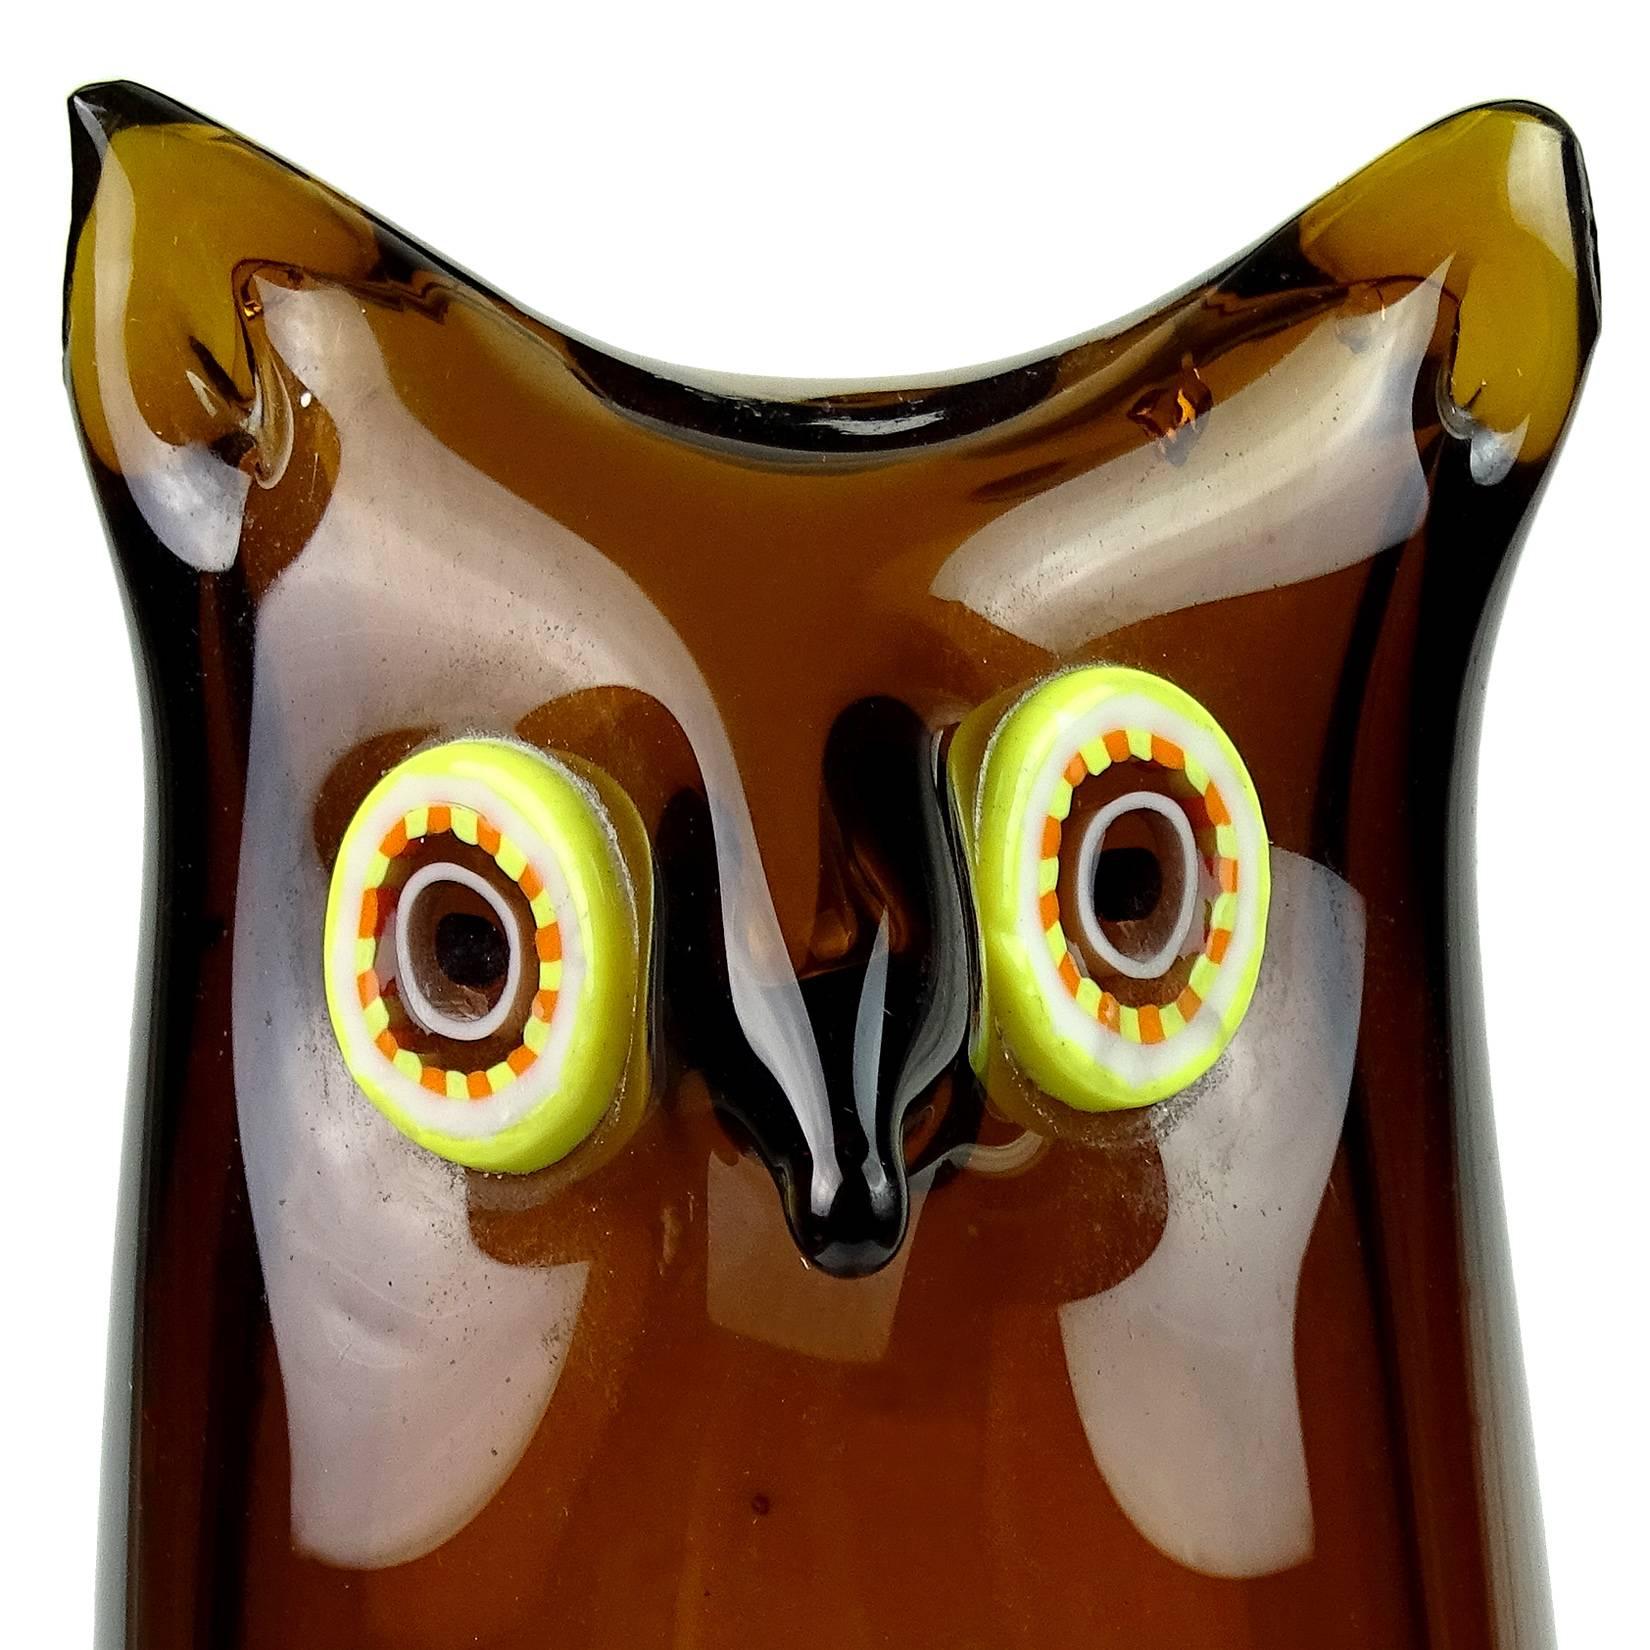 Very rare and cute Murano hand blown dark brown with yellow or orange murrine eyes Italian art glass fox sculpture. Attributed to the Venini company, with original label underneath. Measures 7 1/4" tall.
